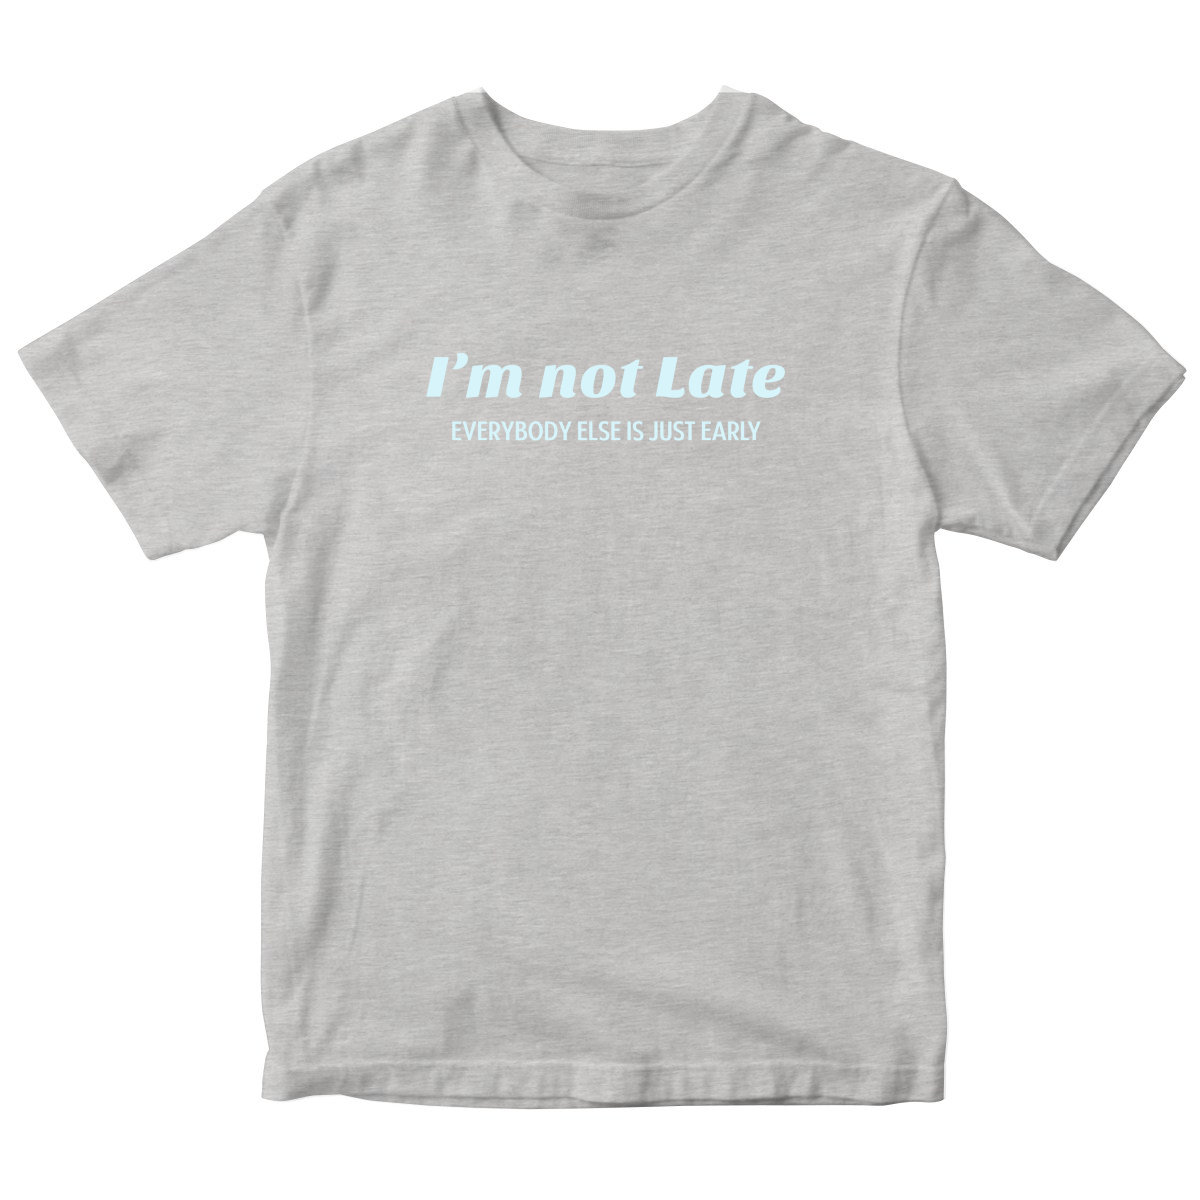 I’m not late everybody else is just early Kids T-shirt | Gray